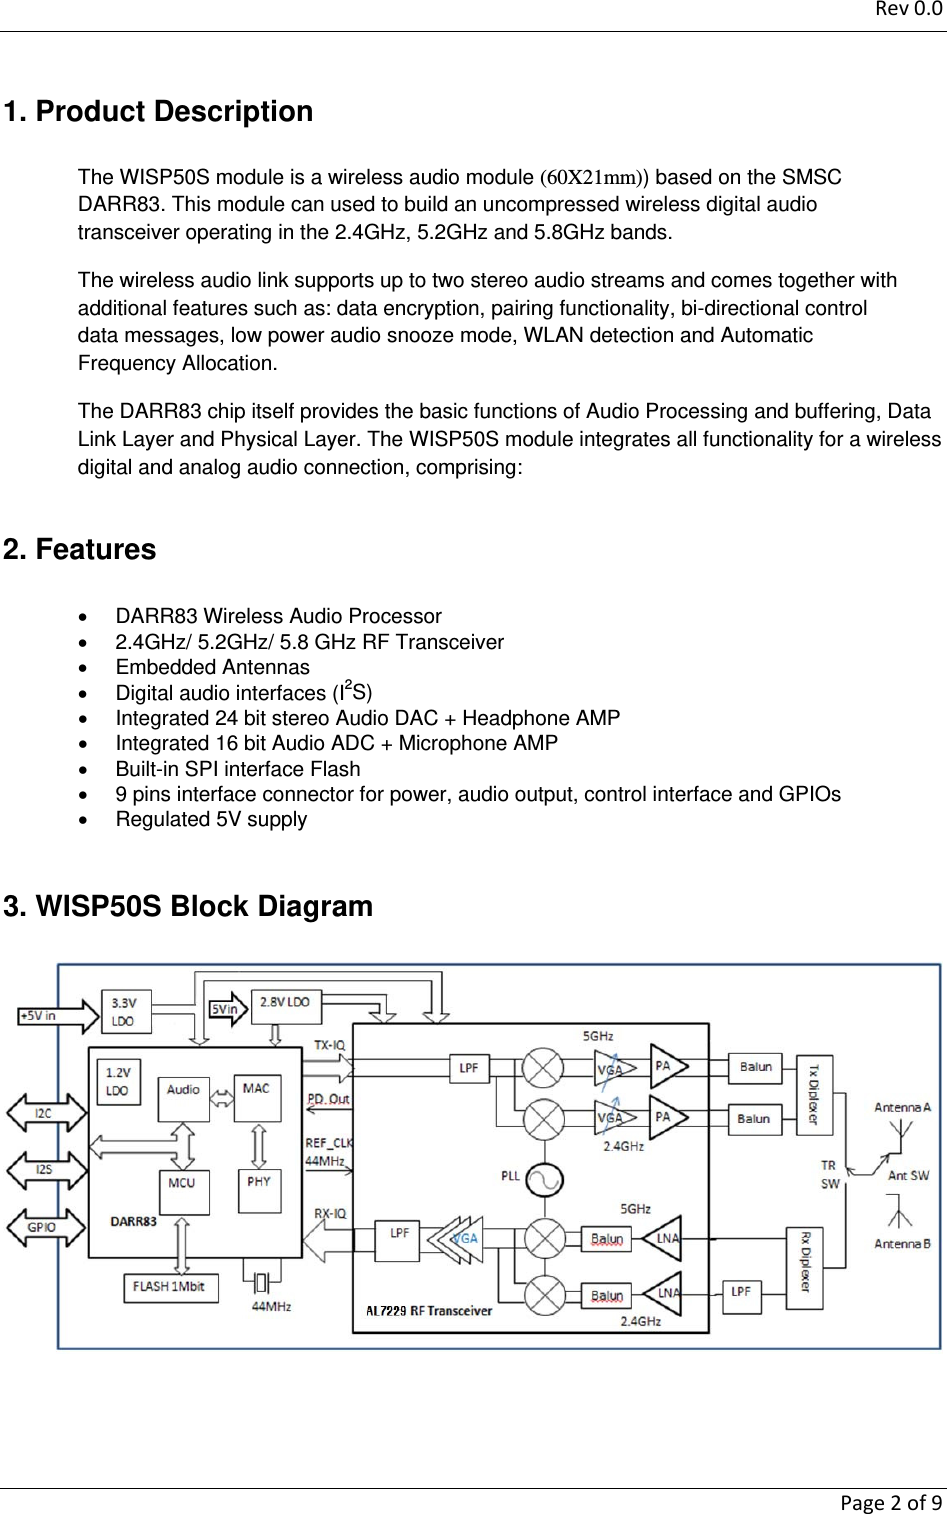 Rev0.0   Page2of91. Product Description The WISP50S module is a wireless audio module (60X21mm)) based on the SMSC DARR83. This module can used to build an uncompressed wireless digital audio transceiver operating in the 2.4GHz, 5.2GHz and 5.8GHz bands. The wireless audio link supports up to two stereo audio streams and comes together with additional features such as: data encryption, pairing functionality, bi-directional control data messages, low power audio snooze mode, WLAN detection and Automatic Frequency Allocation.  The DARR83 chip itself provides the basic functions of Audio Processing and buffering, Data Link Layer and Physical Layer. The WISP50S module integrates all functionality for a wireless digital and analog audio connection, comprising:  2. Features   DARR83 Wireless Audio Processor    2.4GHz/ 5.2GHz/ 5.8 GHz RF Transceiver  Embedded Antennas    Digital audio interfaces (I2S)   Integrated 24 bit stereo Audio DAC + Headphone AMP   Integrated 16 bit Audio ADC + Microphone AMP   Built-in SPI interface Flash     9 pins interface connector for power, audio output, control interface and GPIOs   Regulated 5V supply   3. WISP50S Block Diagram    